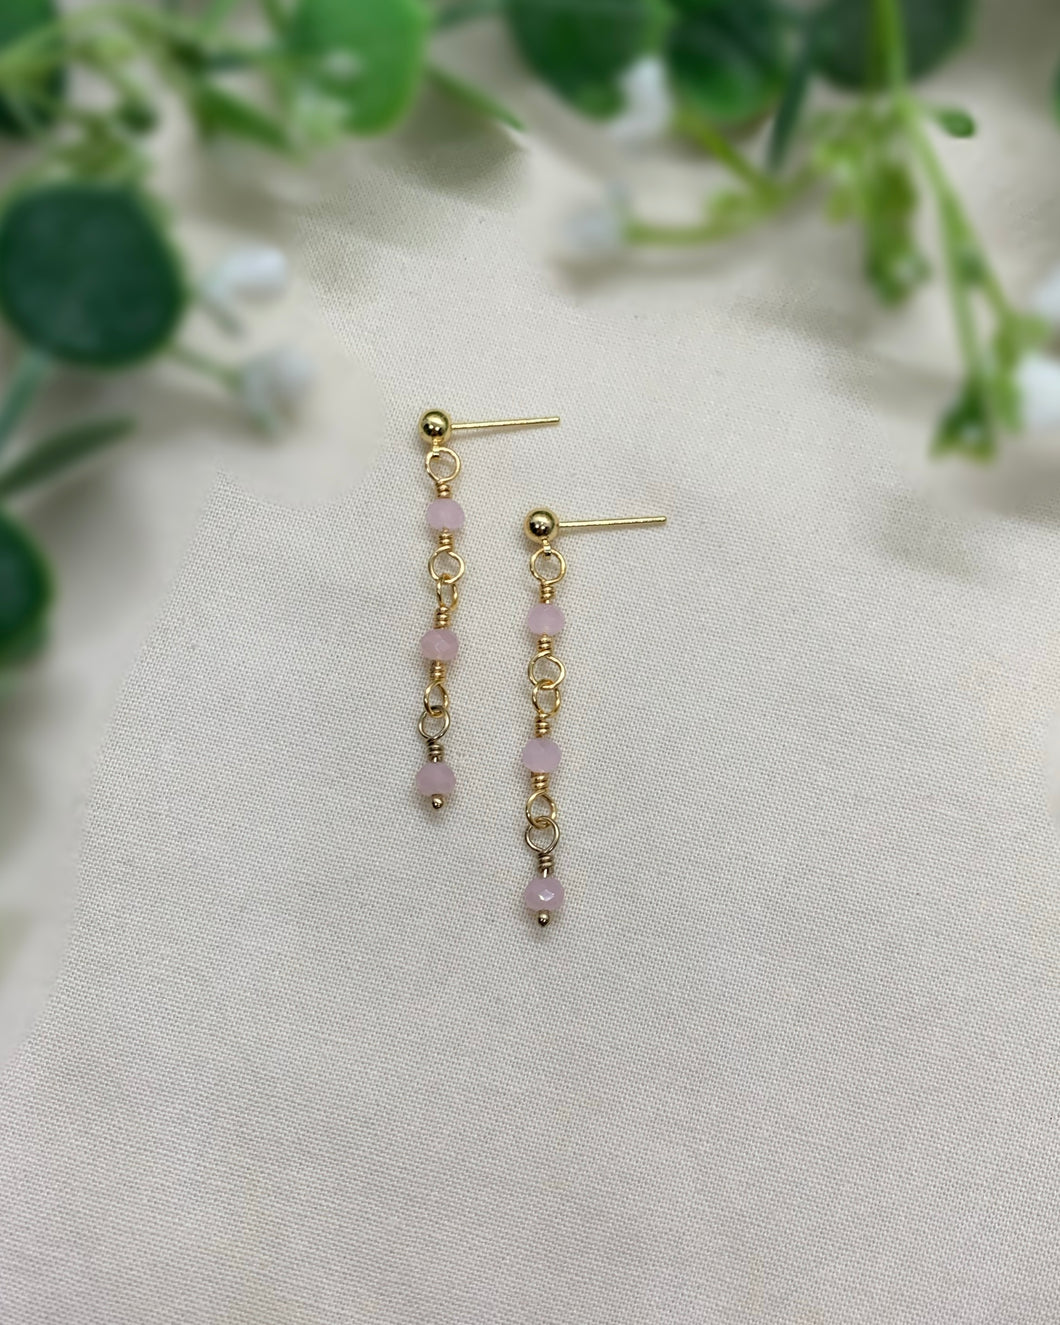 Tickled Pink- Gold Stud Earrings